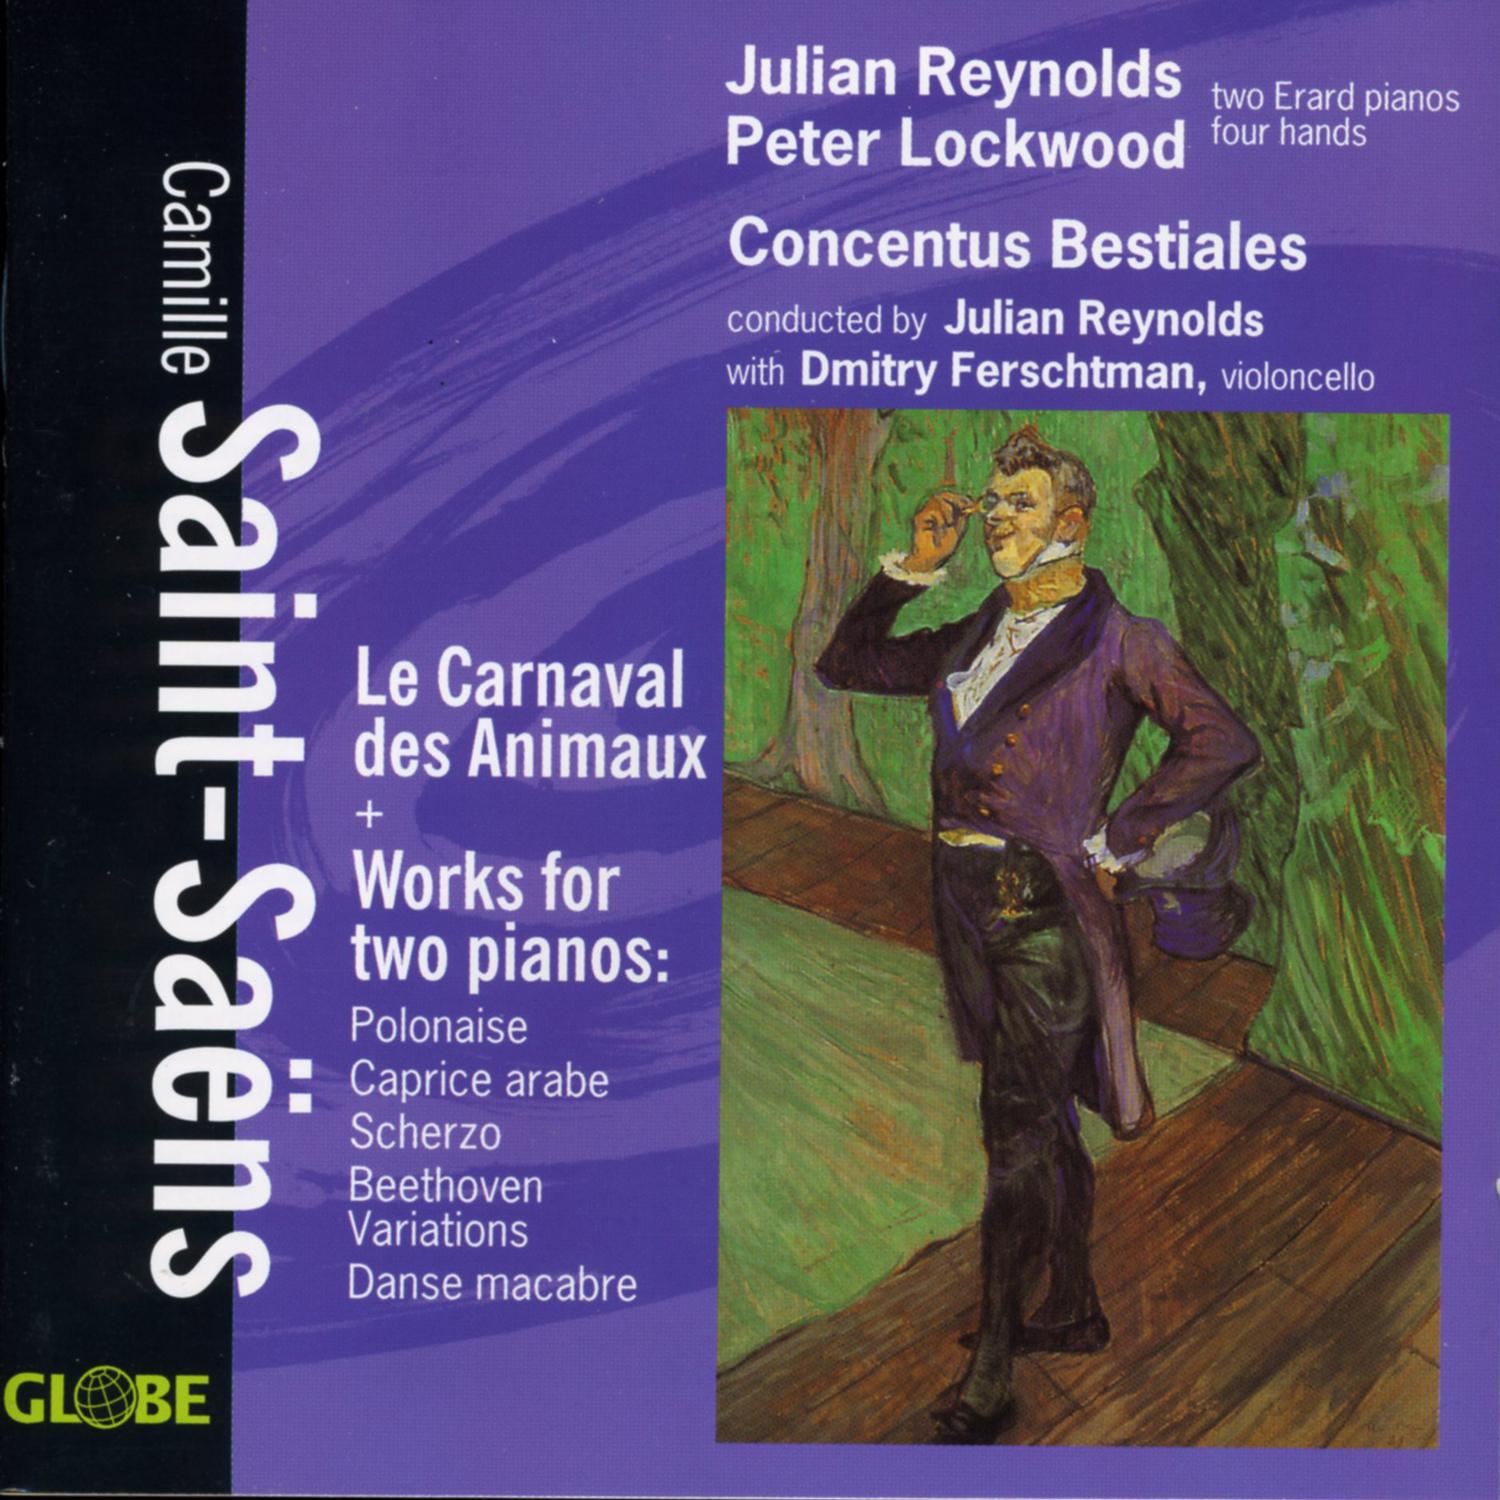 Saint-Saëns: Le Carnaval des Animaux, Works for Two Pianos专辑